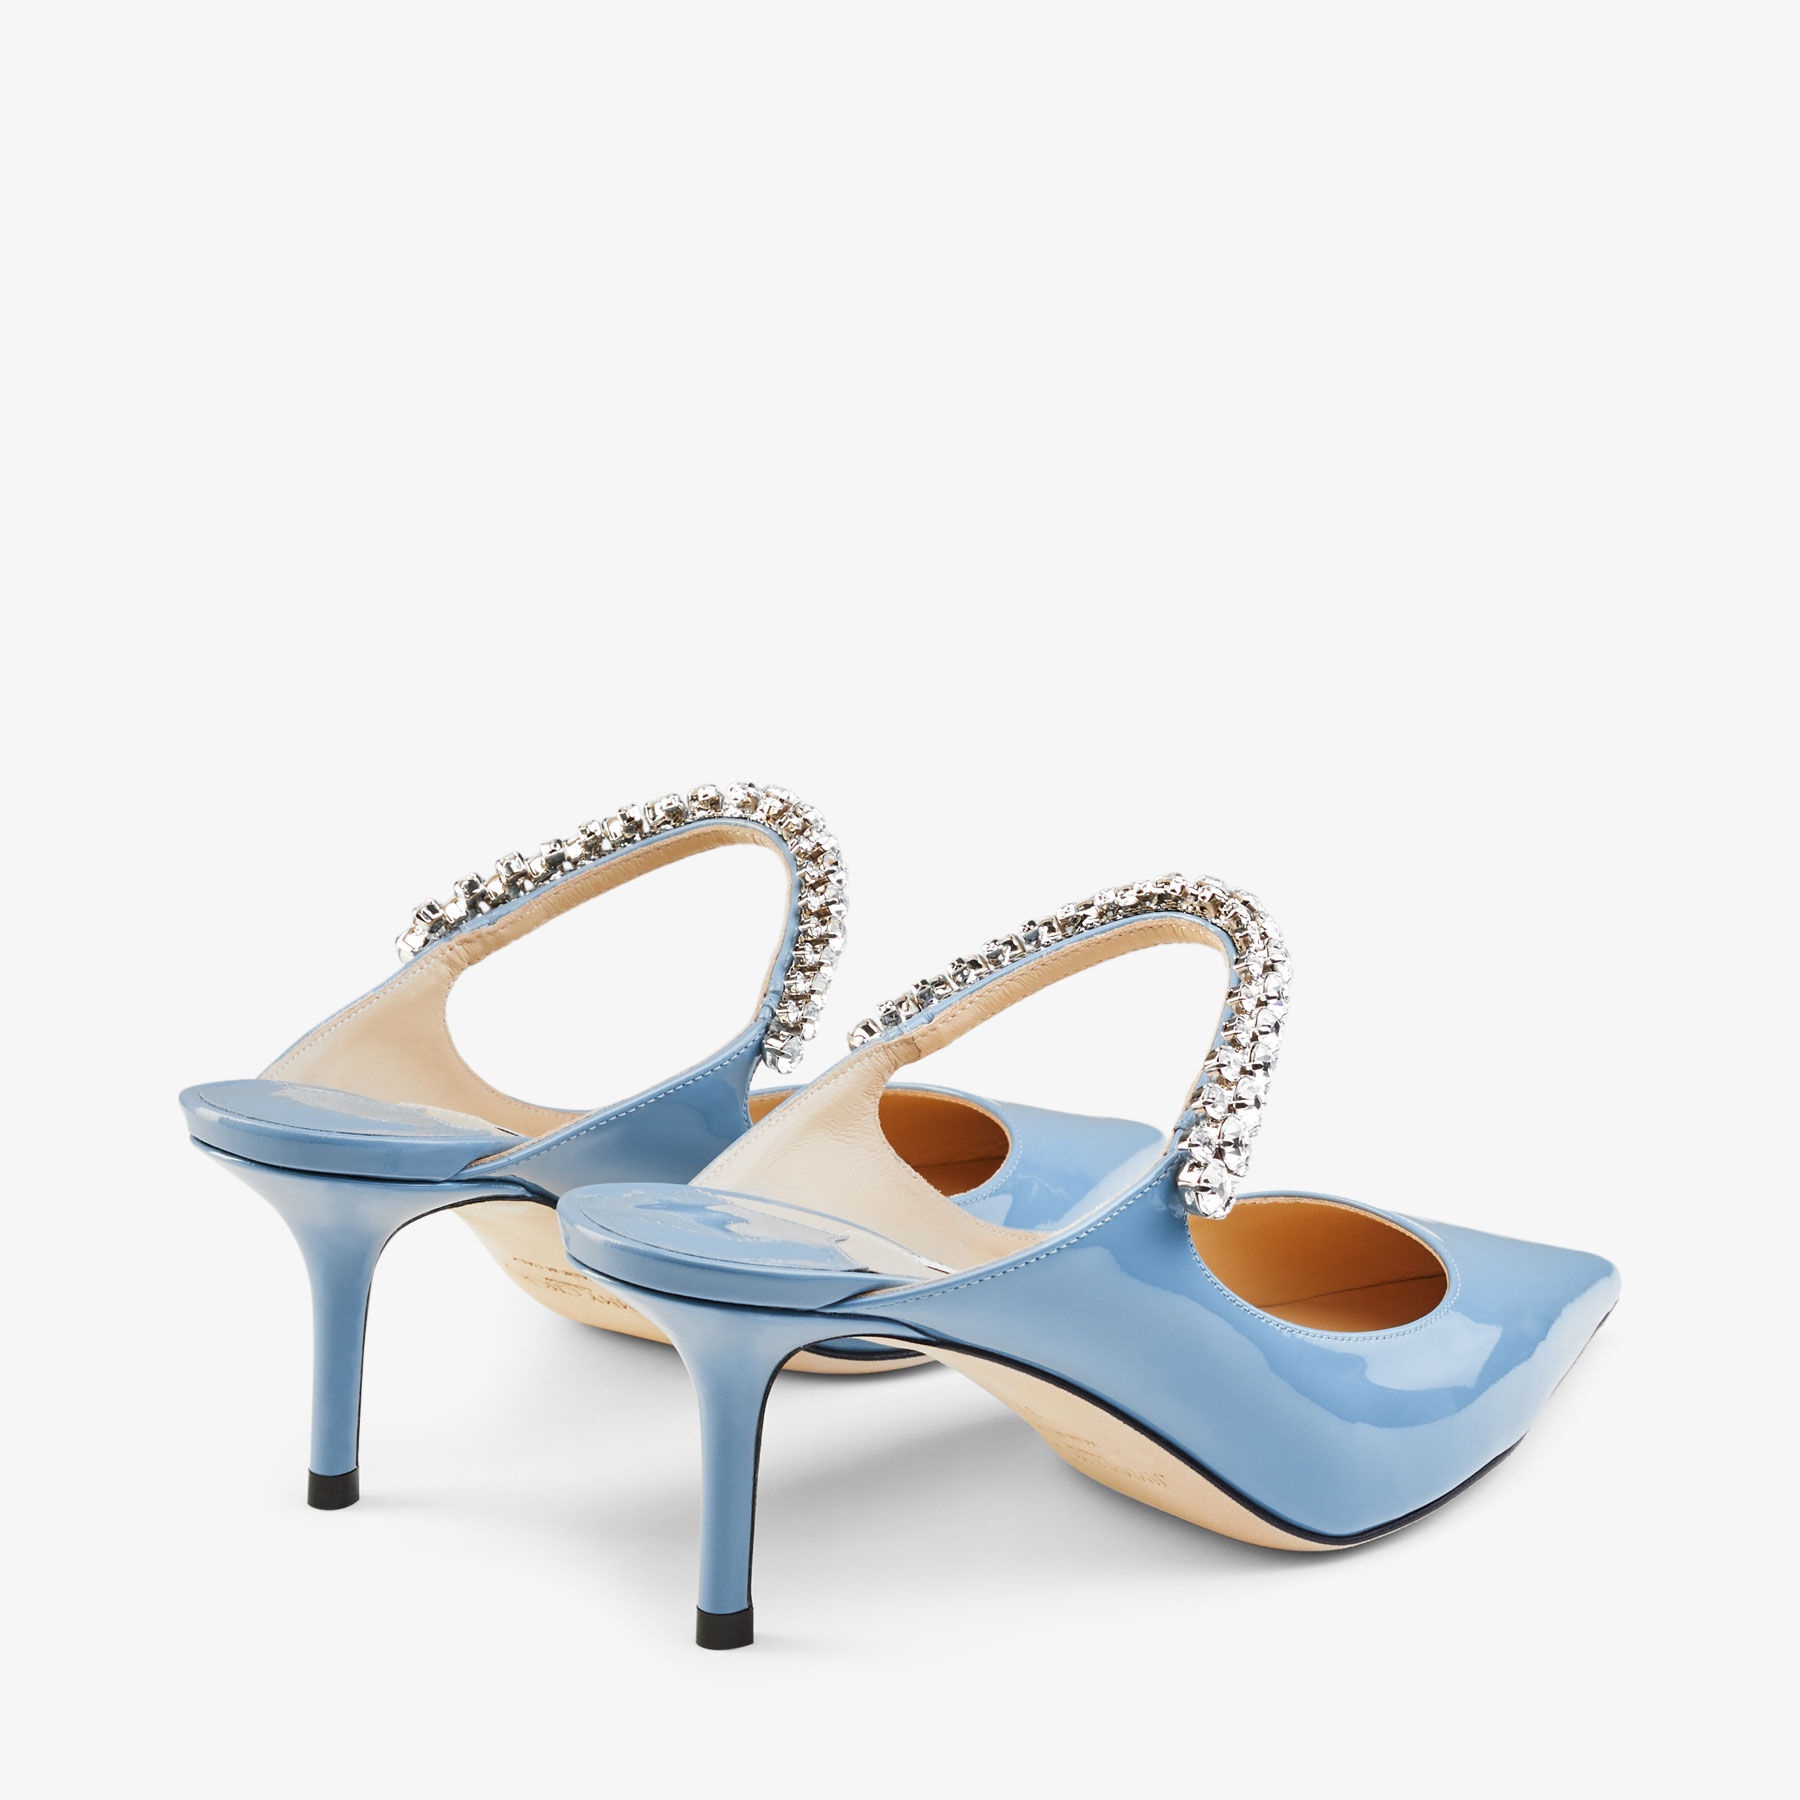 Bing 65
Smoky Blue Patent Leather Mules with Crystal Strap - 6